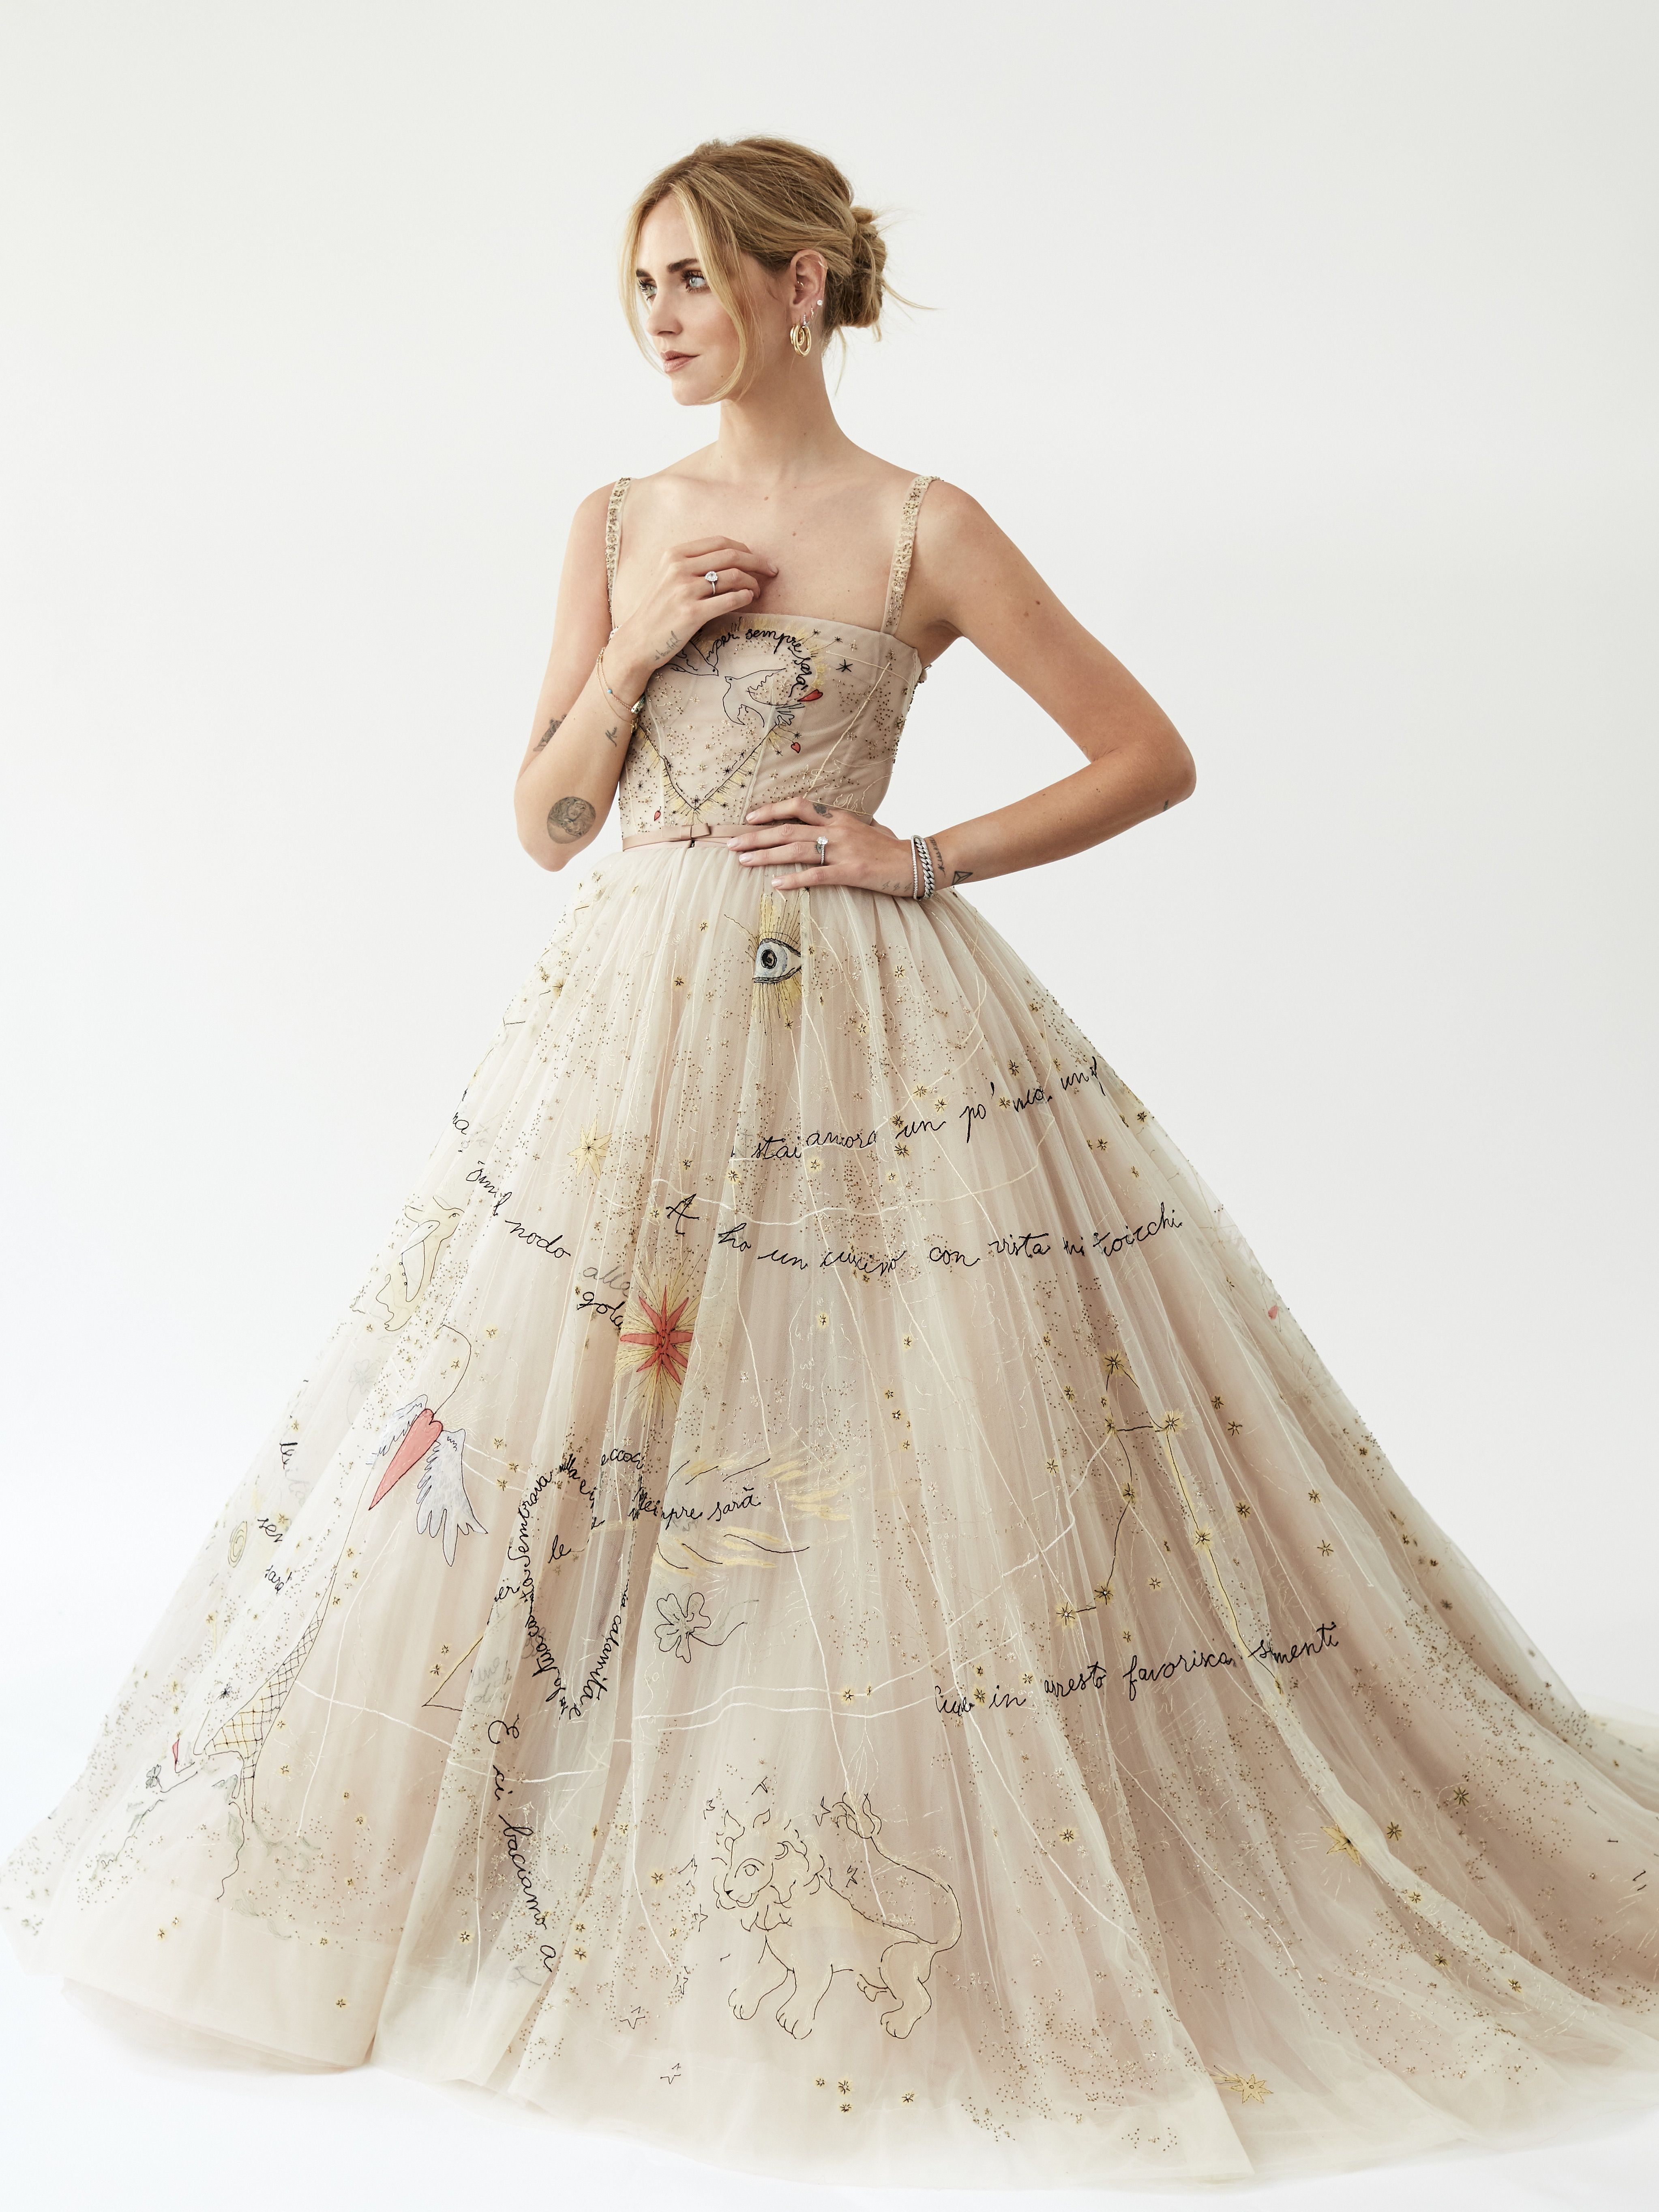 This Brides Custom Wedding Dress Was Inspired by a 40s Dior Look  Over  The Moon